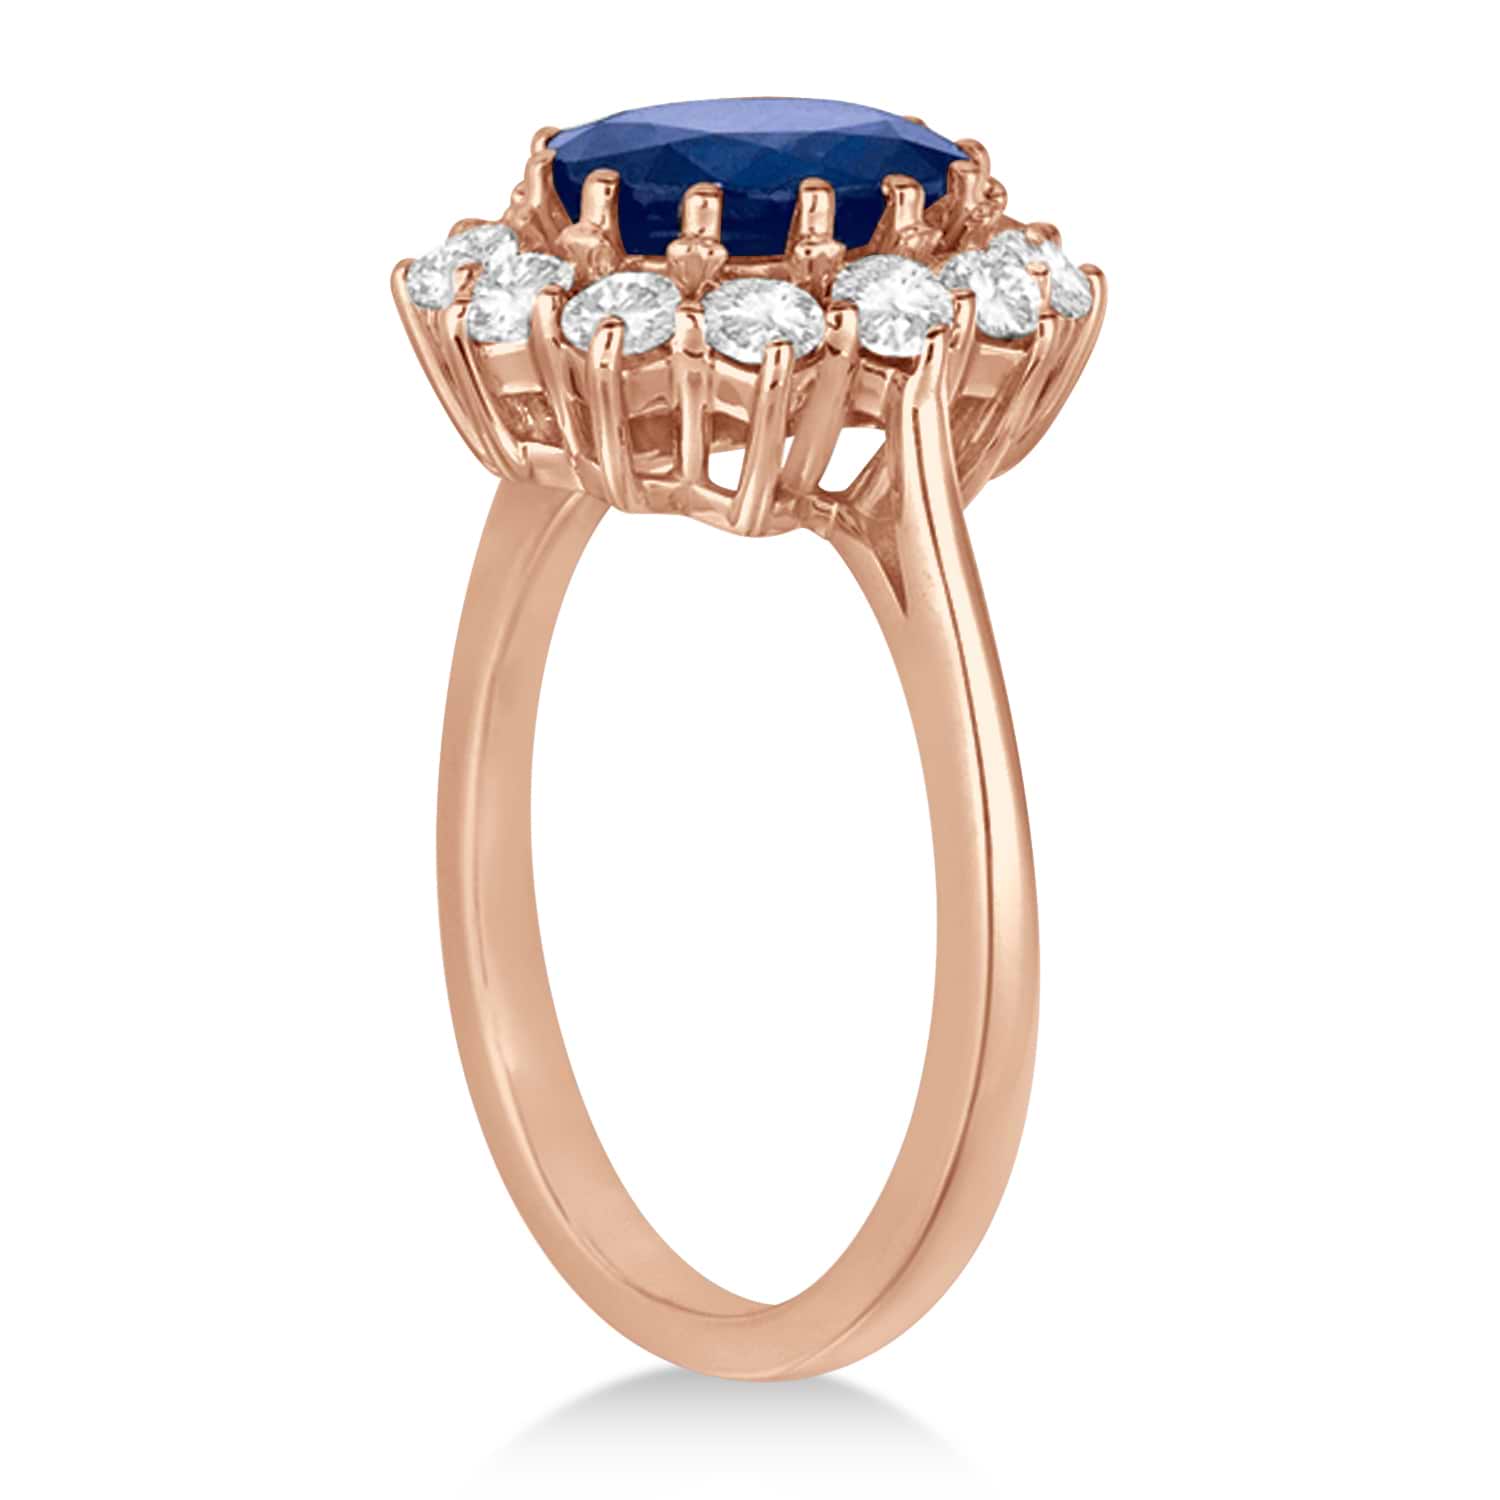 Oval Blue Sapphire & Diamond Accented Ring 18k Rose Gold (5.40ctw)